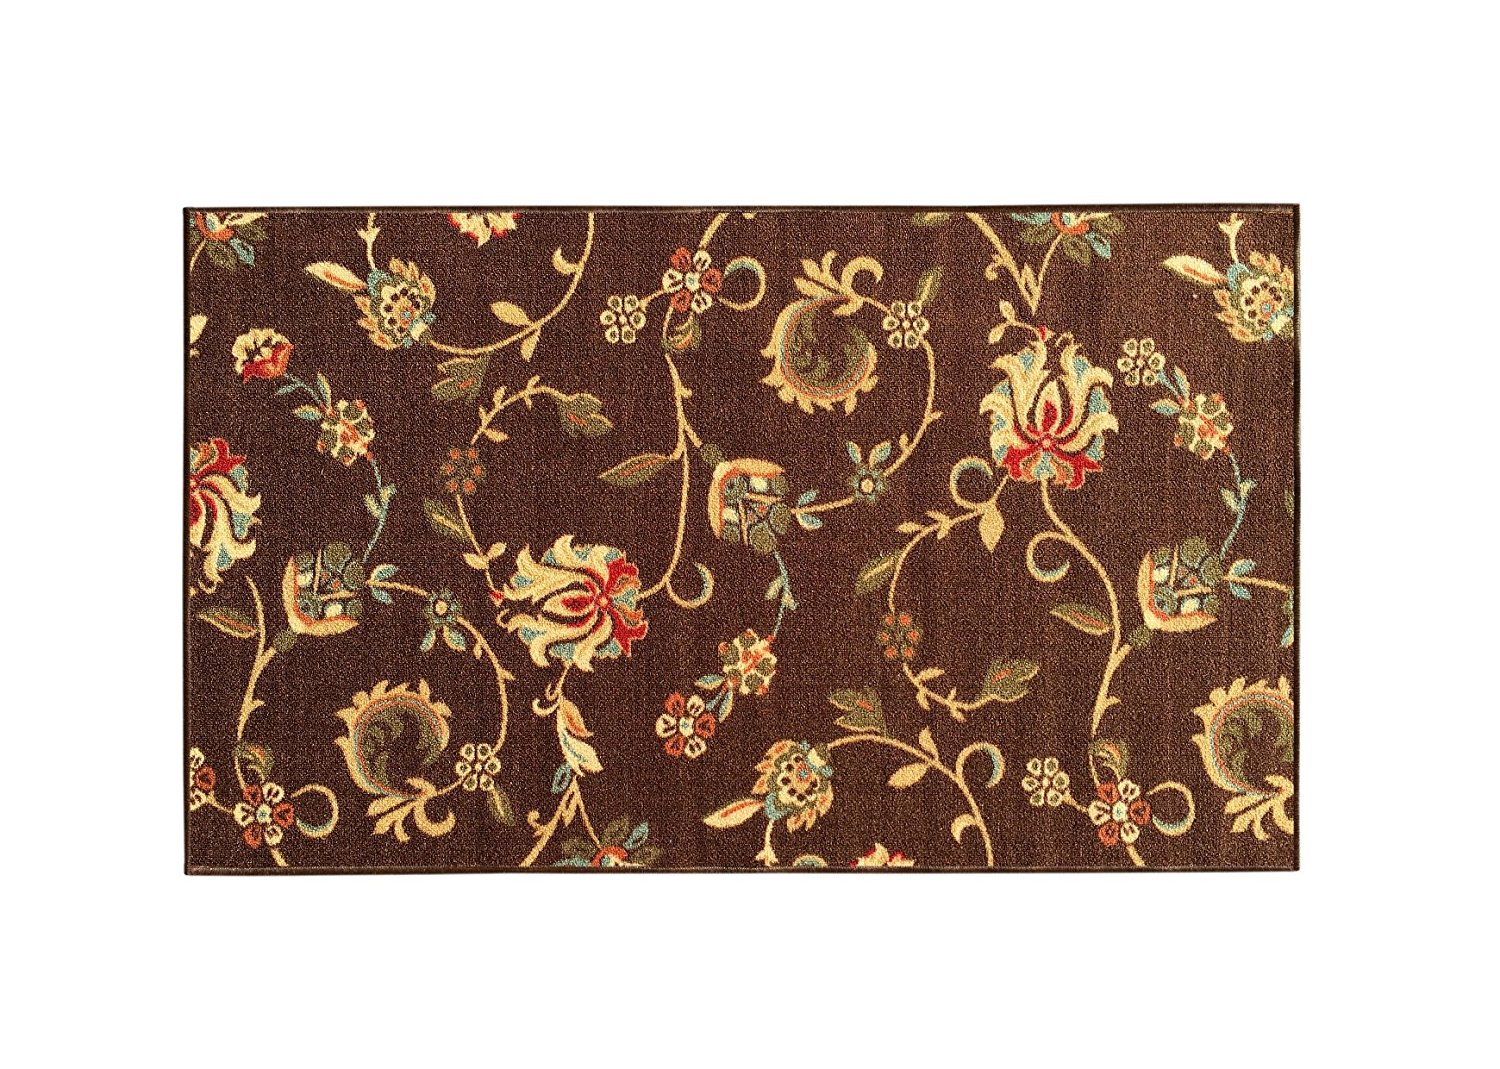 Rubber Backed Mat 18" x 32" Chocolate Brown Floral Doormat Accent Non-Slip Rug - Rana Collection Kitchen Dining Living Hallway Bathroom Pet Entry Rugs RAN1228-12